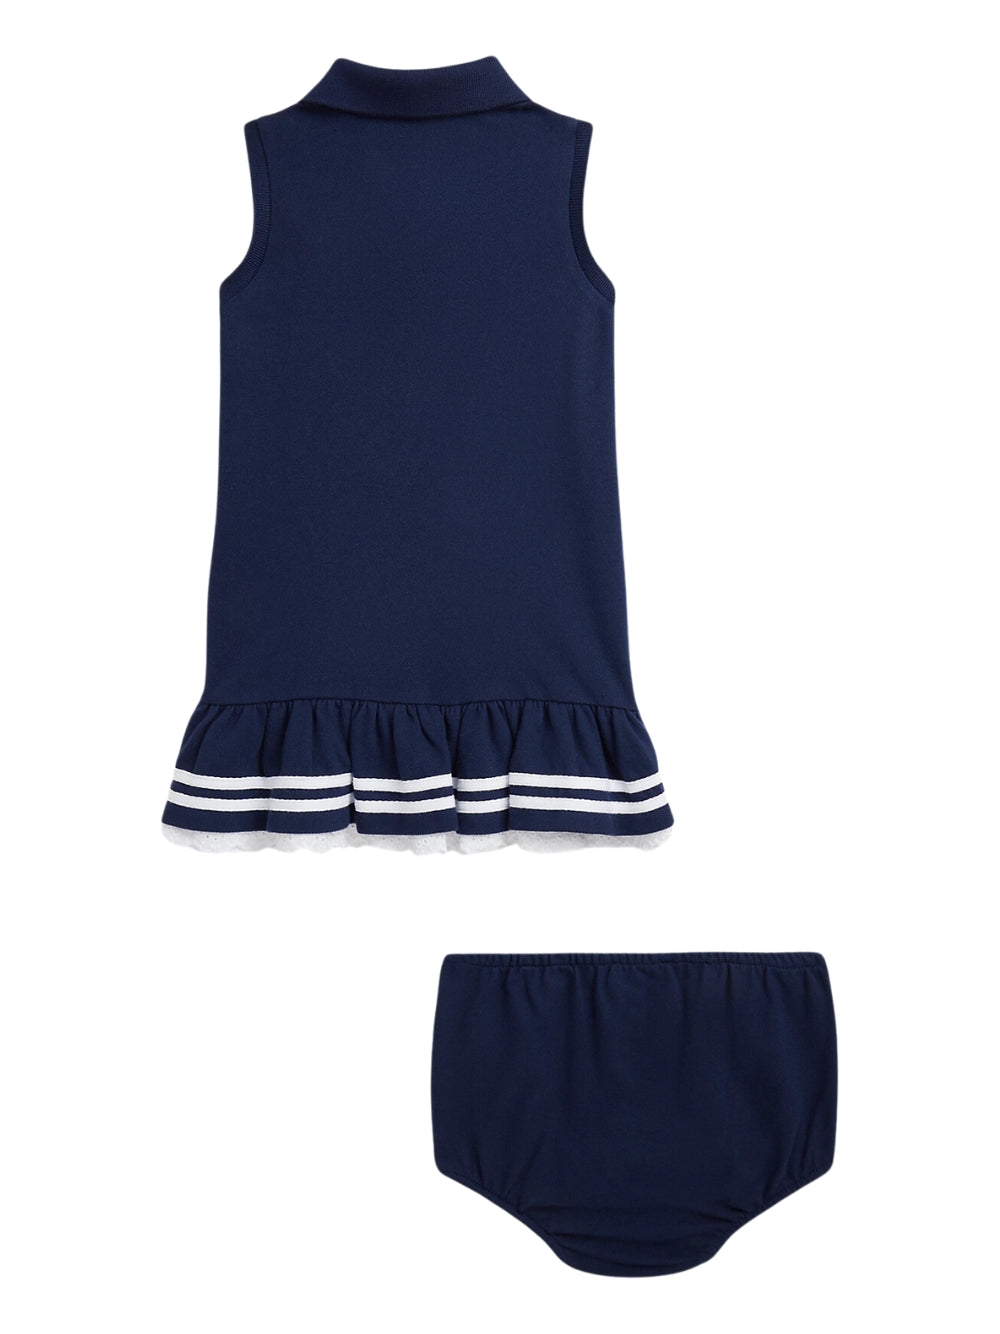 Polosailor Dresses Day Dress